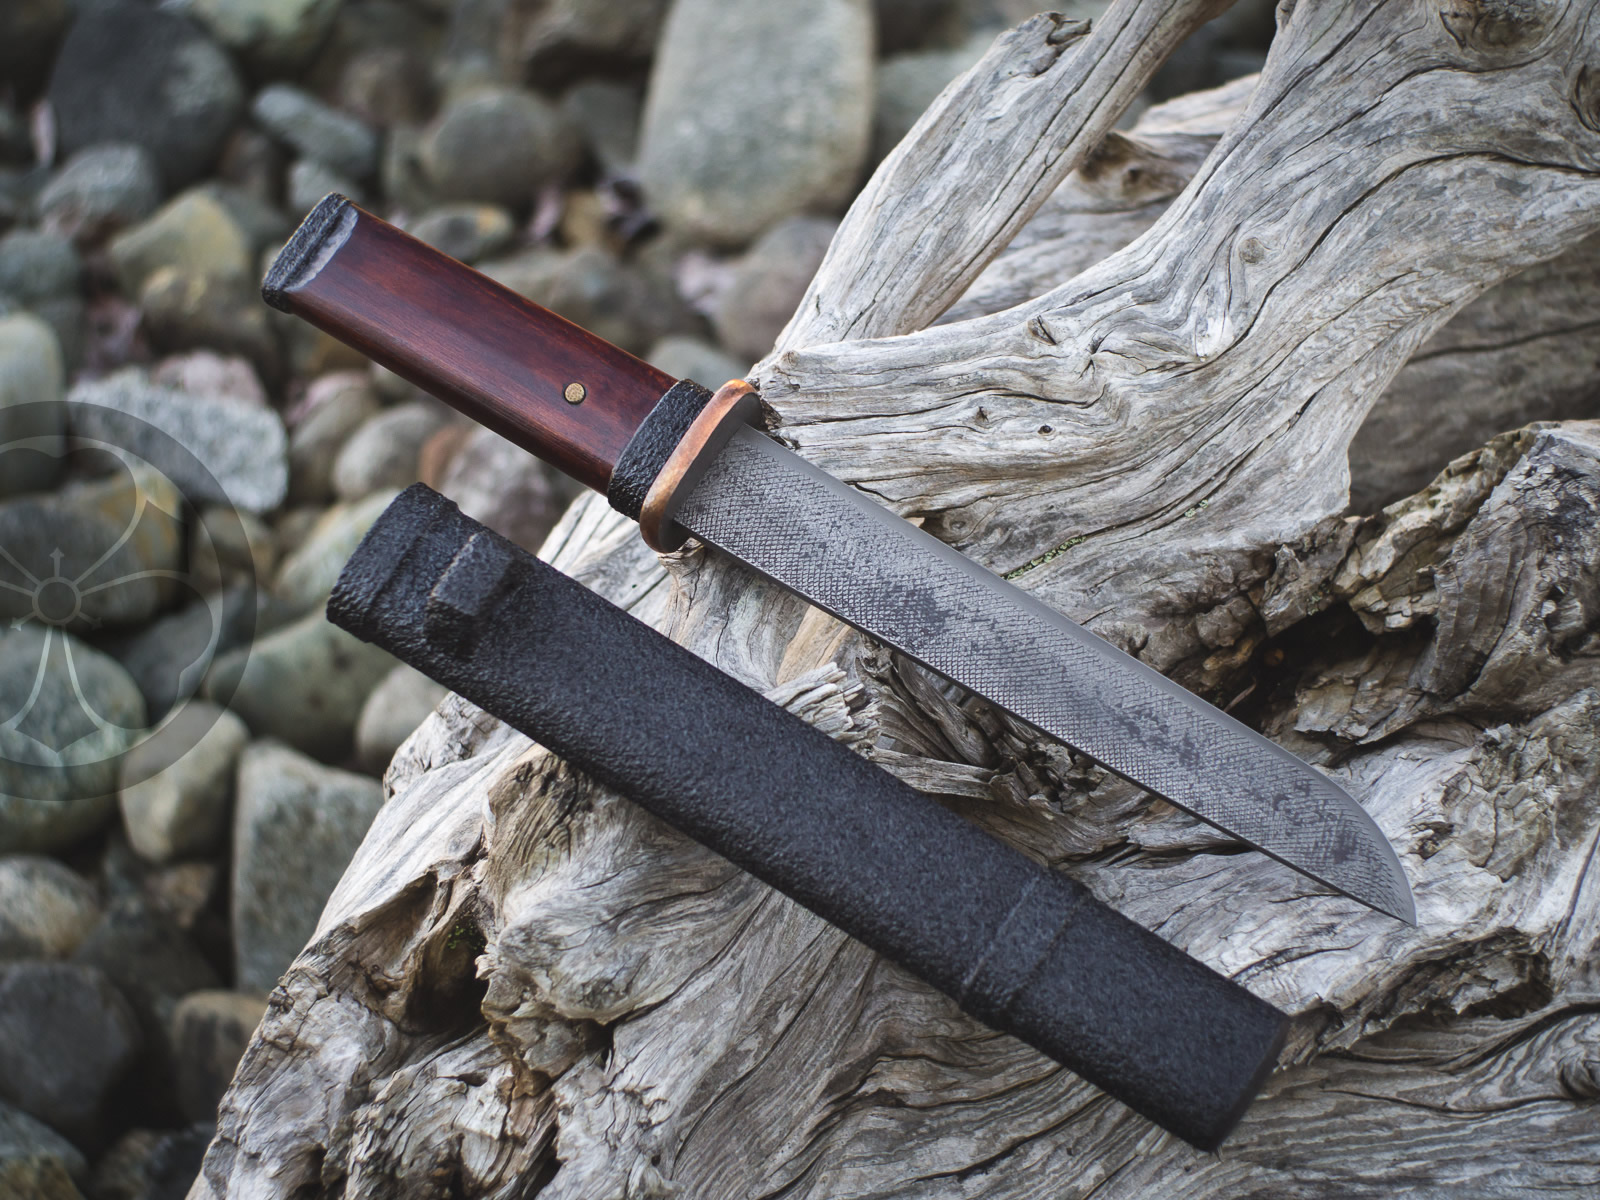 Island Blacksmith: Charcoal forged knives from reclaimed materials.